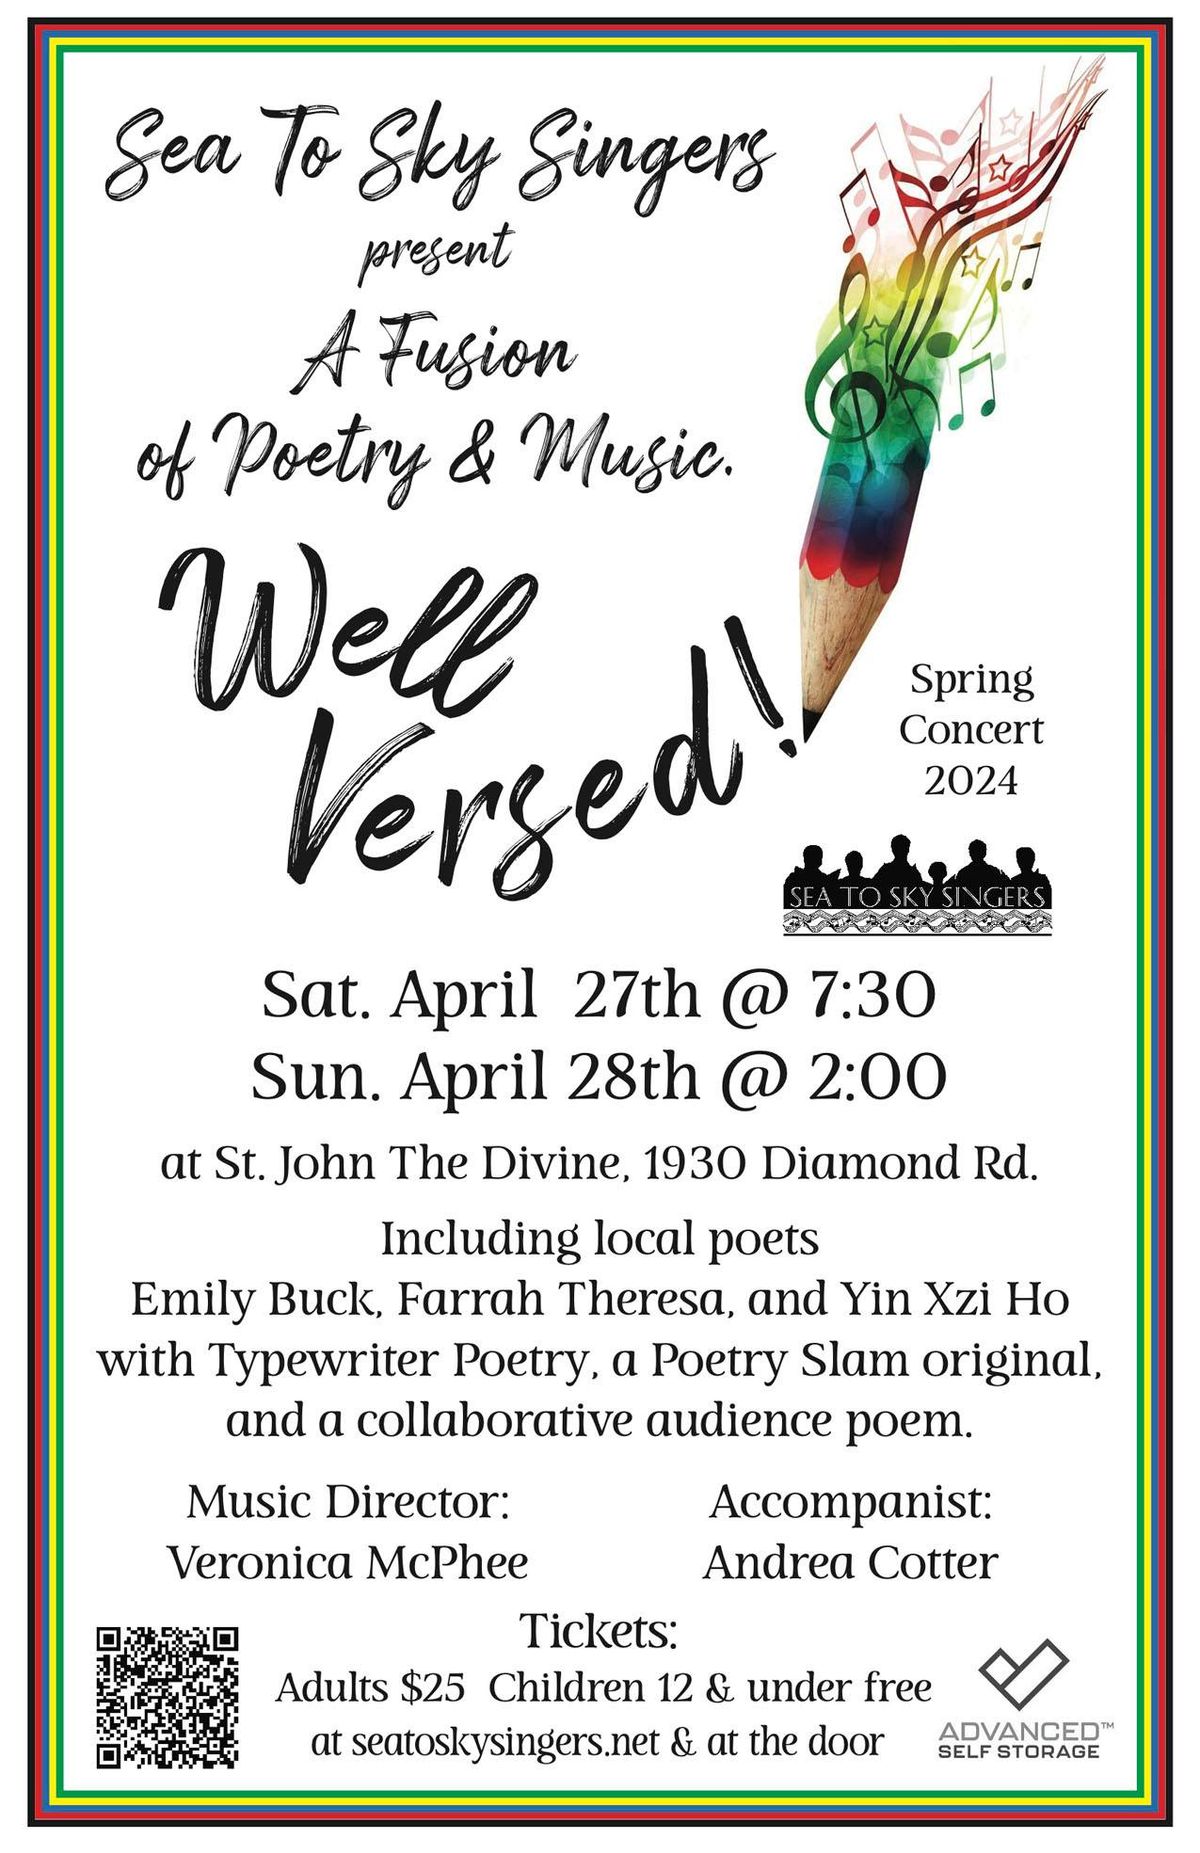 Well Versed, a fusion of poetry and music